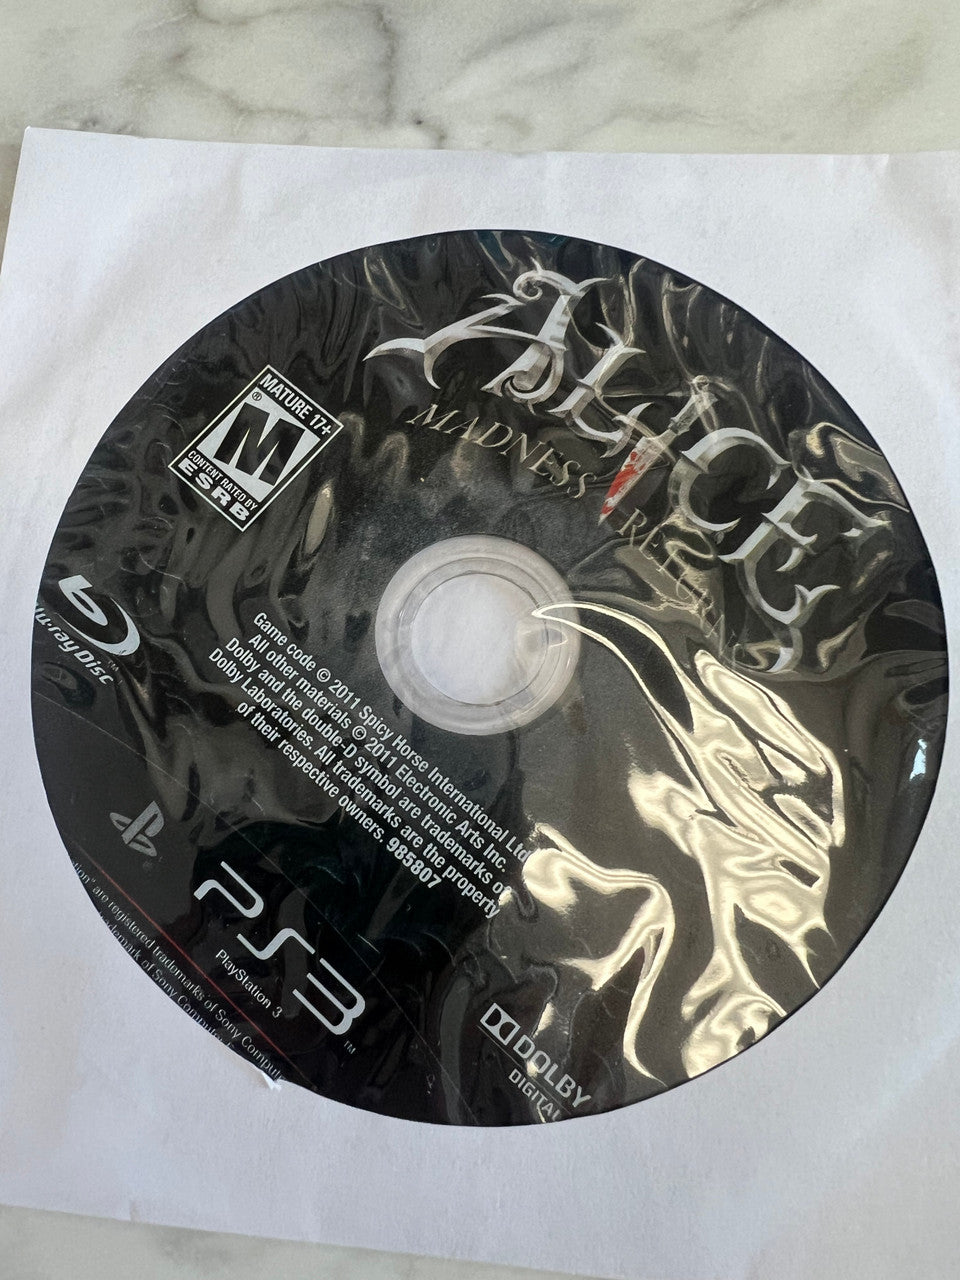 Alice Madness Returns Playstation 3 PS3 Disc Only